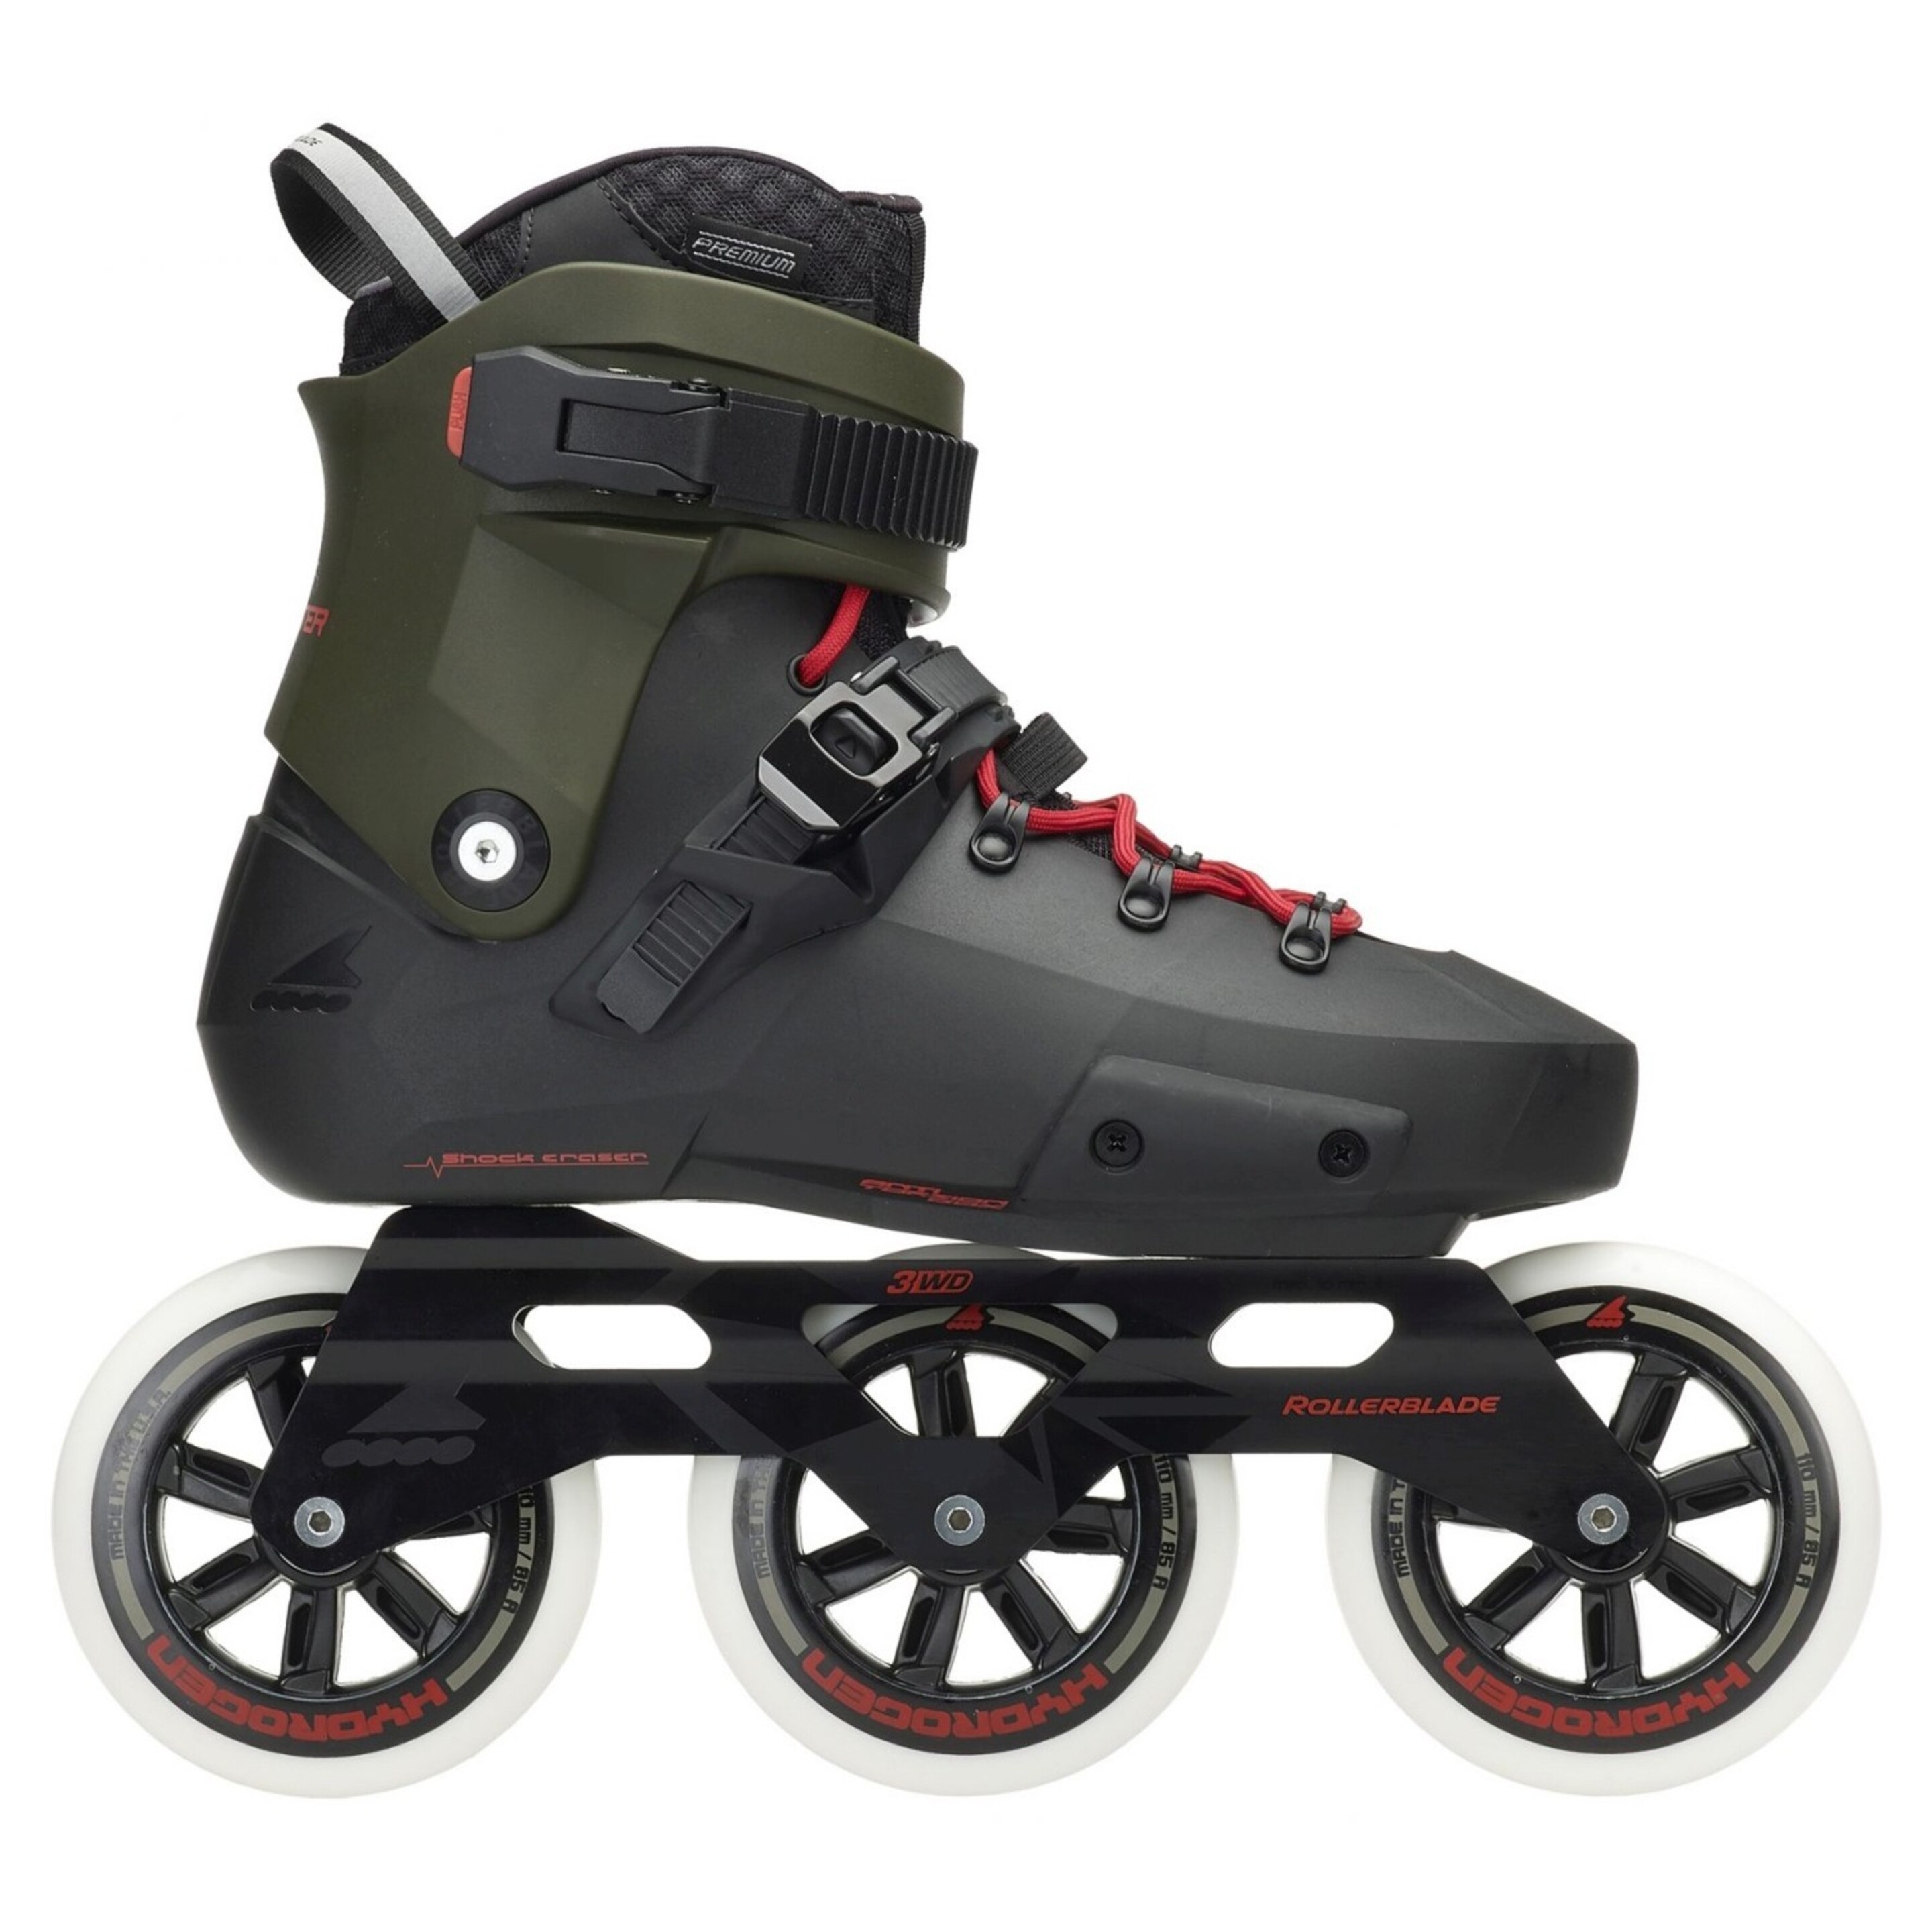 Patines Twister Edge 3wd Rollerblade